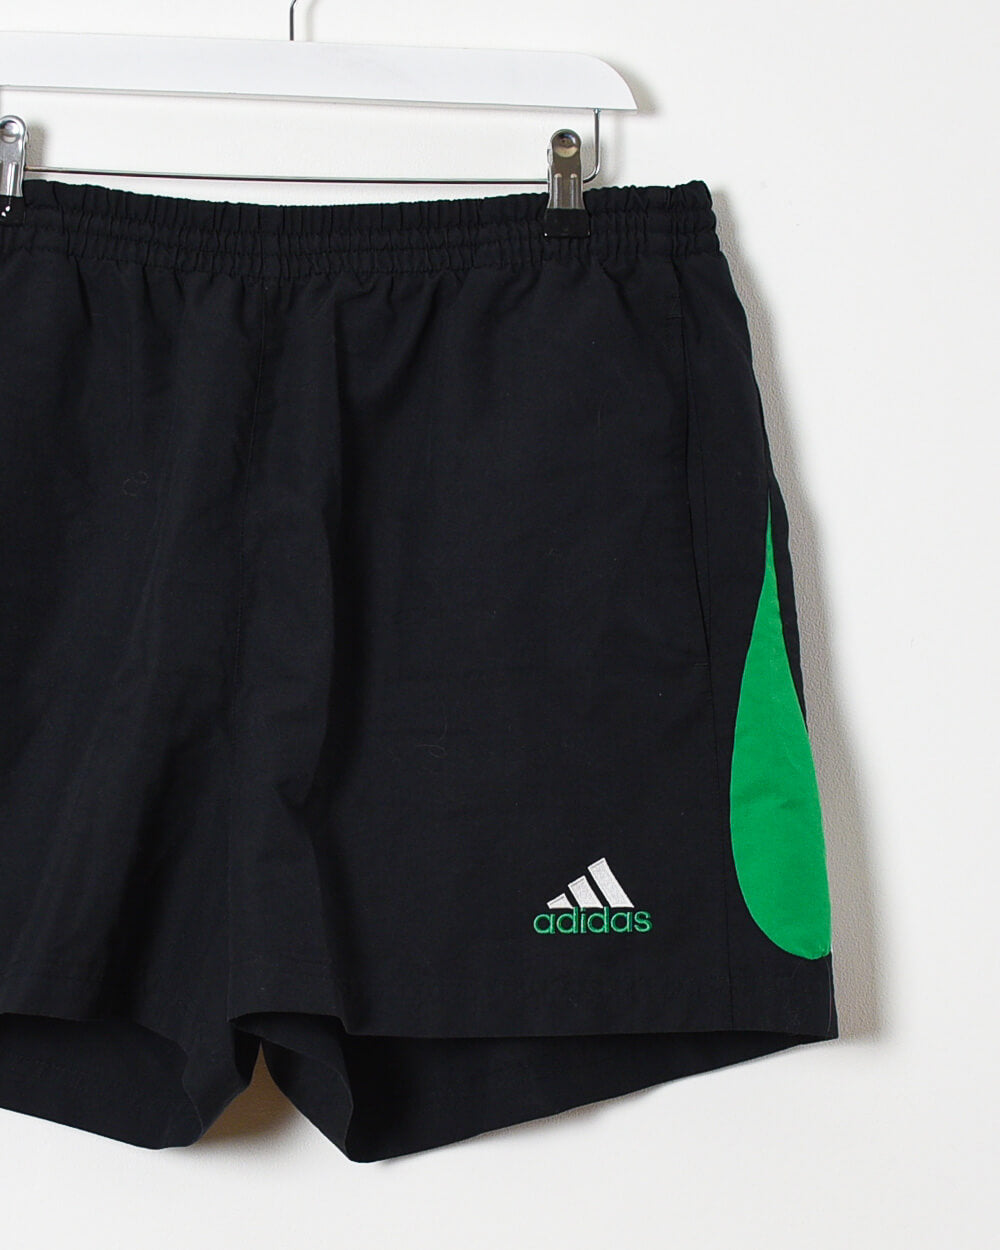 Adidas Shorts - W38 L17 - Domno Vintage 90s, 80s, 00s Retro and Vintage Clothing 